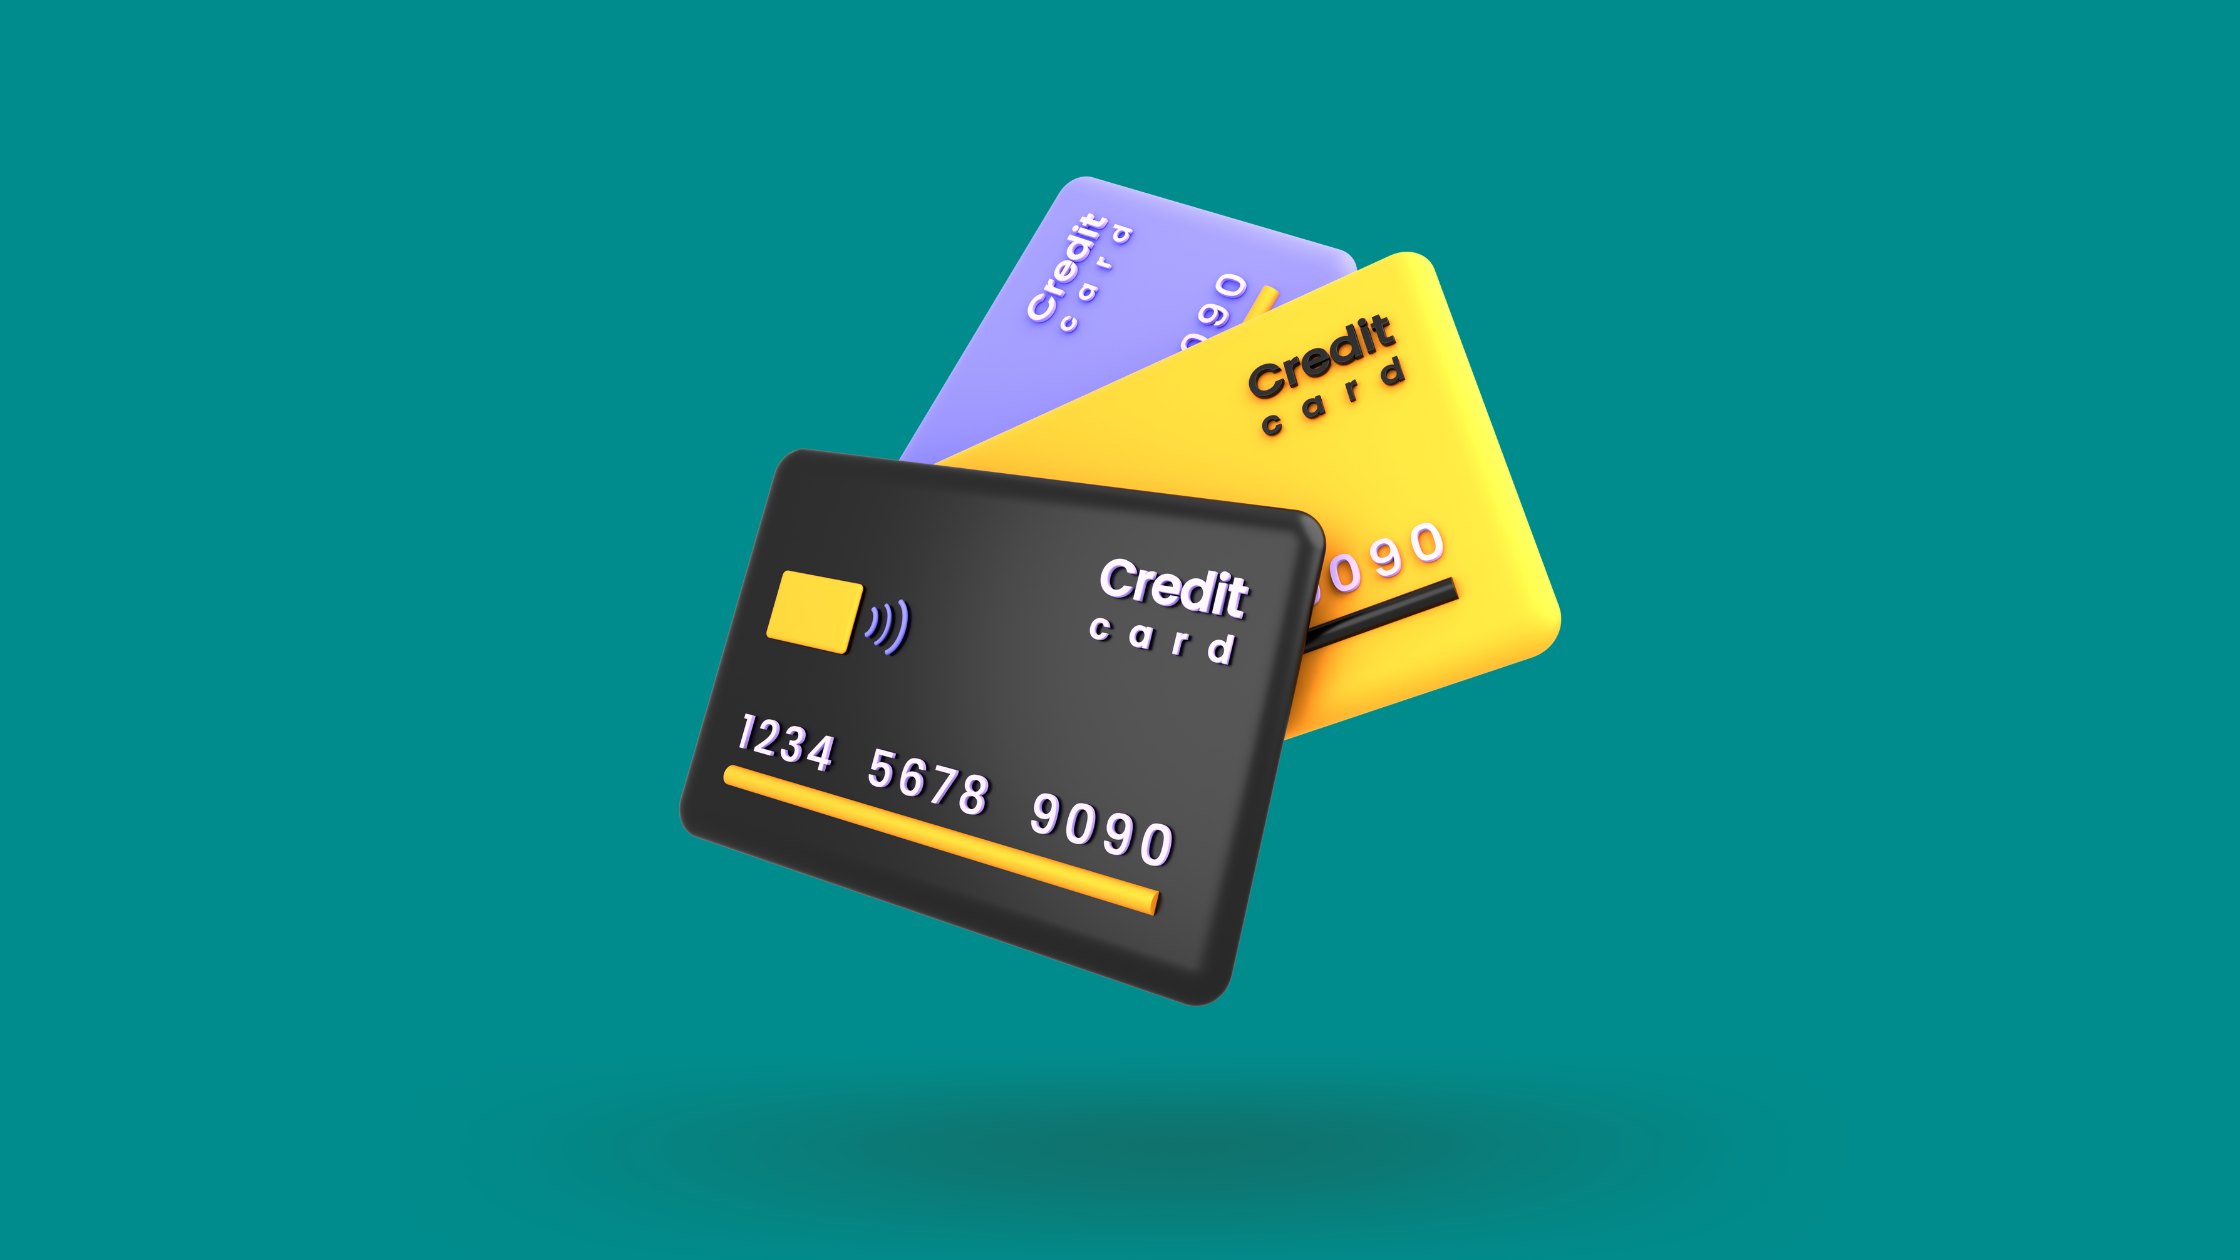 Crypto Credit Cards Explained: What They Are, How They Work & How to Choose the Right One